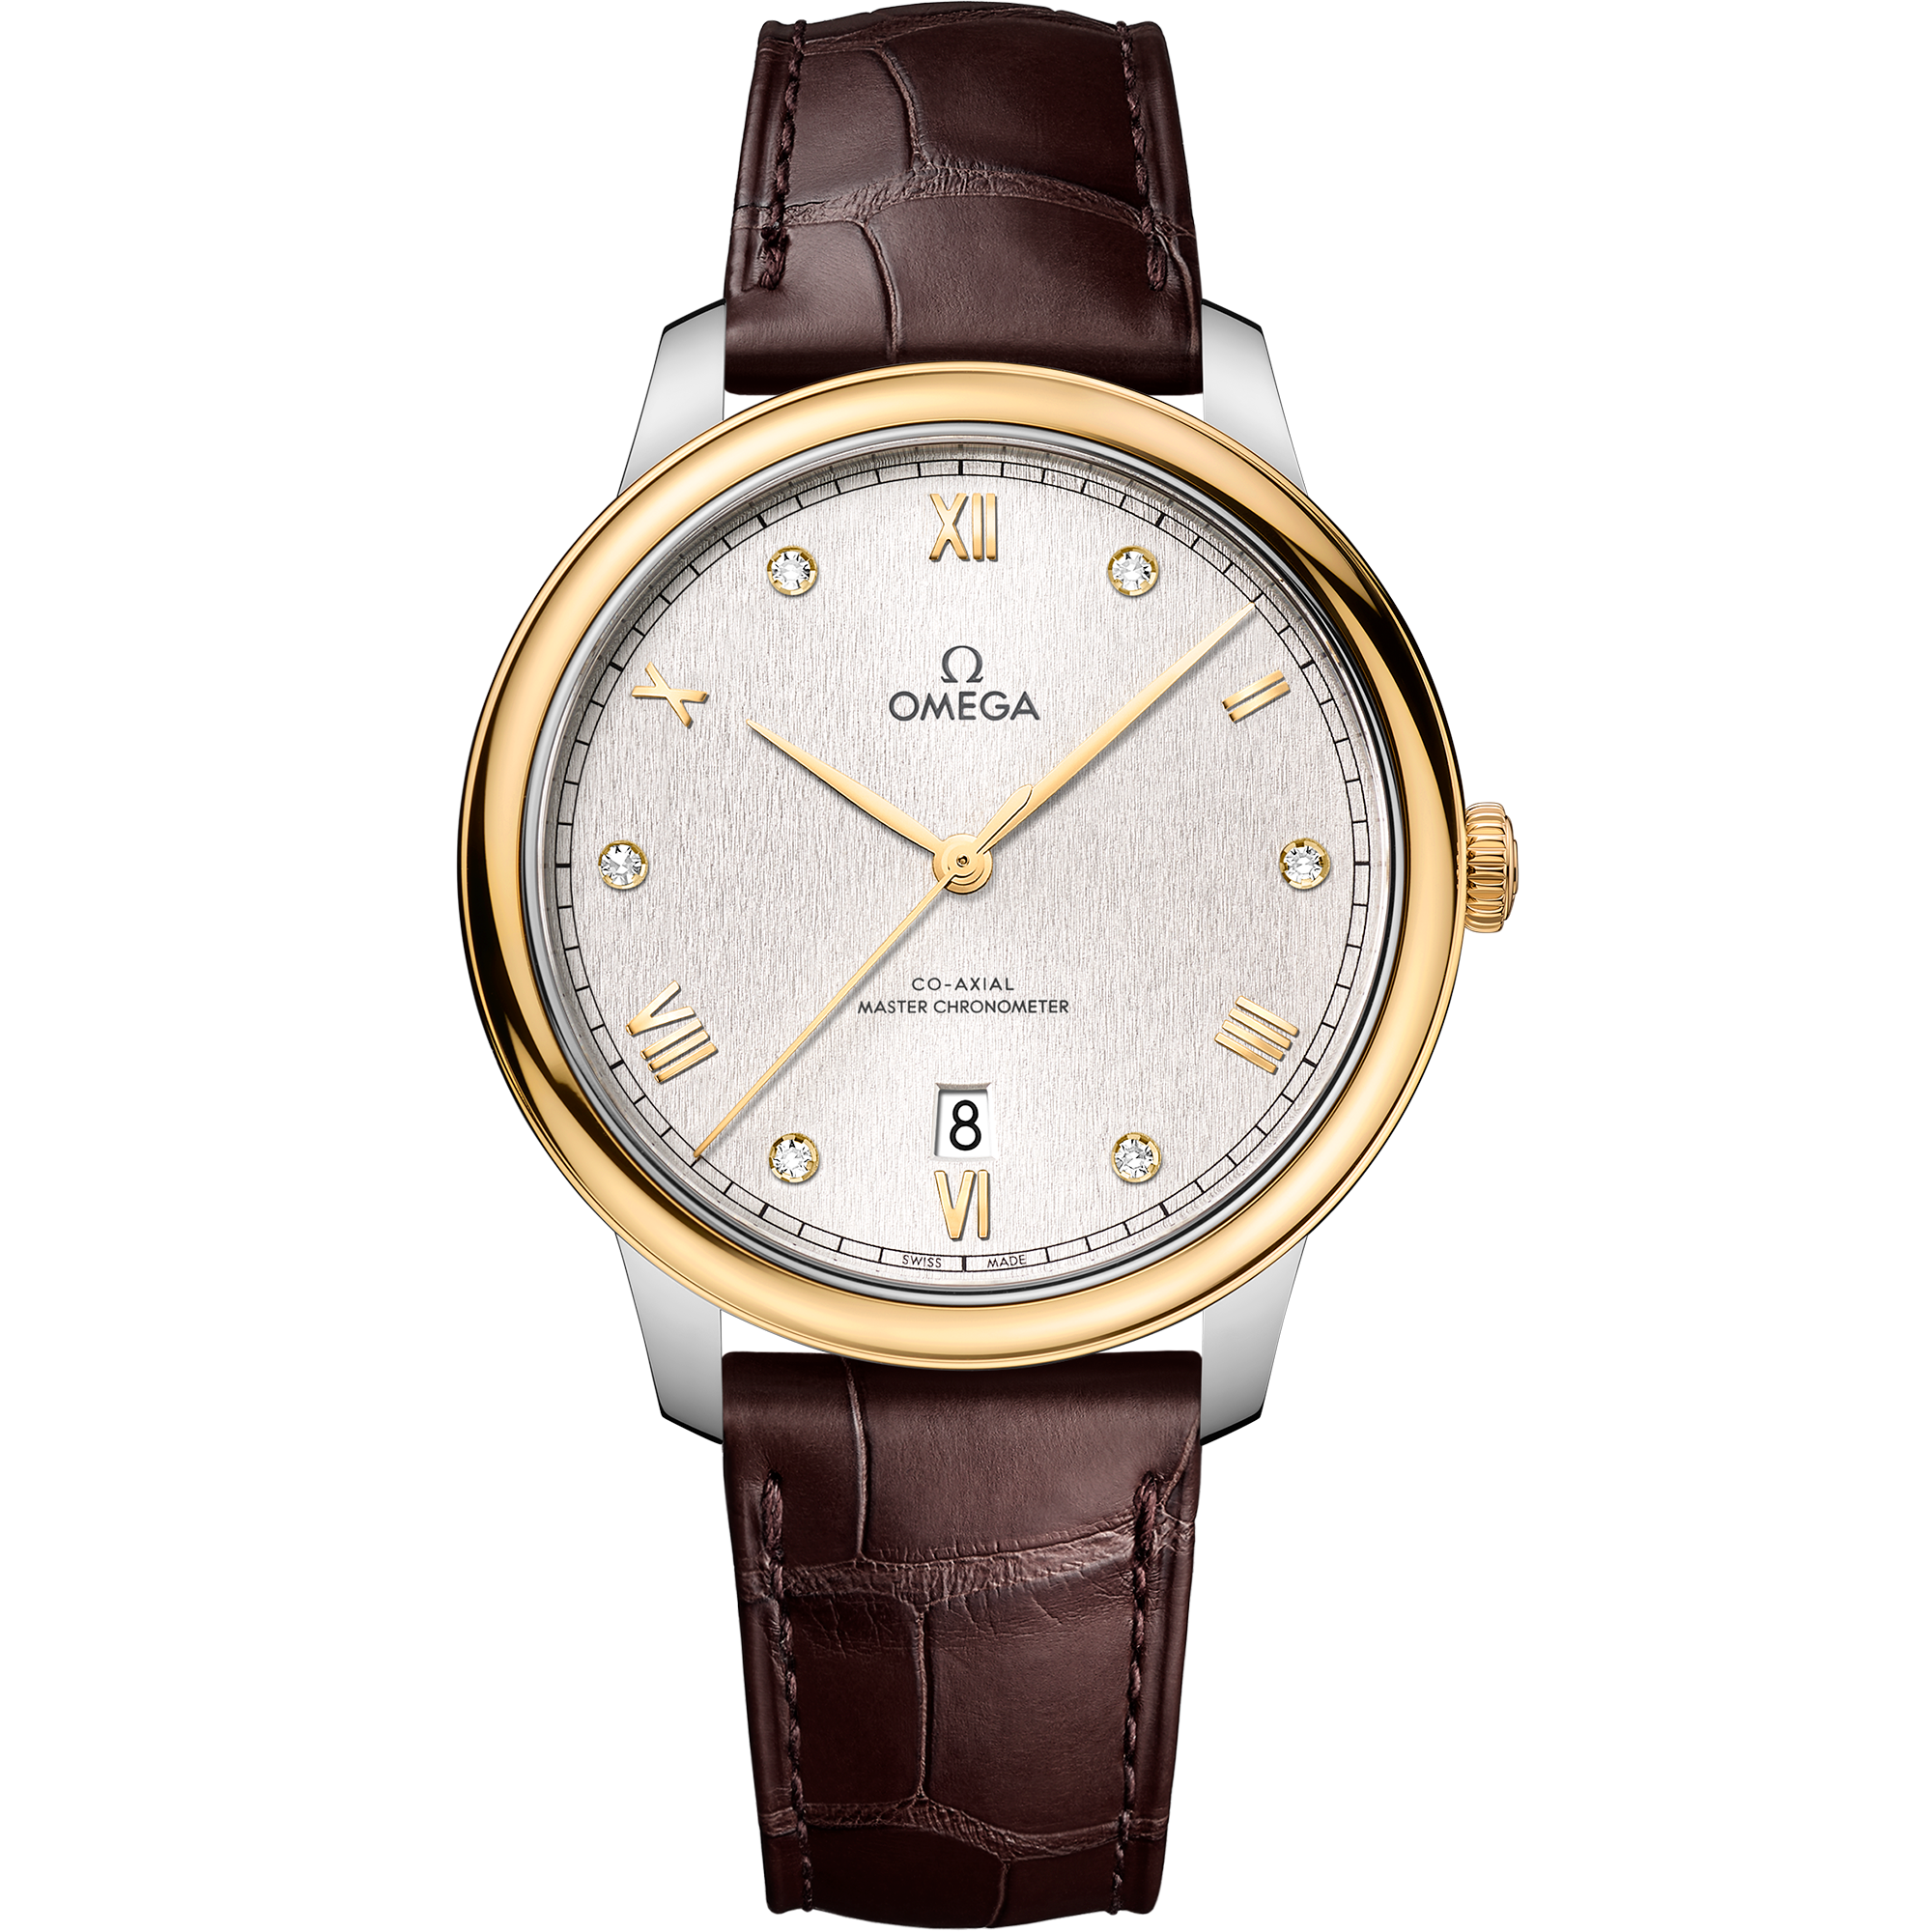 De Ville 40 mm, steel - yellow gold on leather strap - 434.23.40.20.52.001